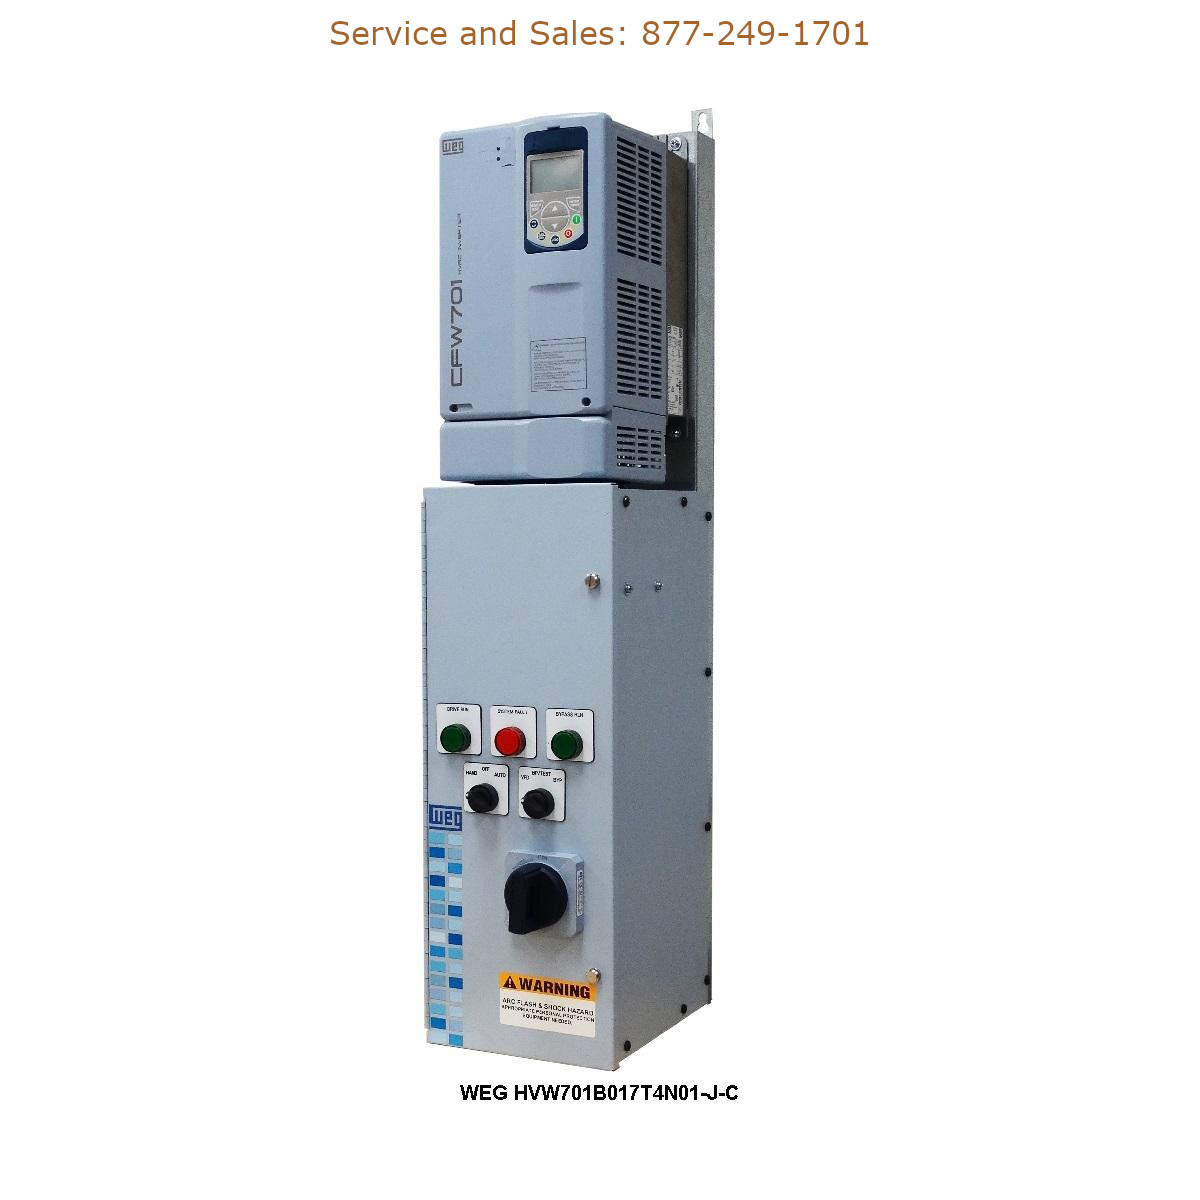 WEG HVW701B017T4N01-J-C WEG Model Number HVW701B017T4N01-J-C WEG Drives, Variable Speed Drives Repair Service, Troubleshooting, Replacement Parts https://gesrepair.com/wp-content/uploads/2022/WEG/WEG_HVW701B017T4N01-J-C_Drives_Variable_Speed_Drives.jpg